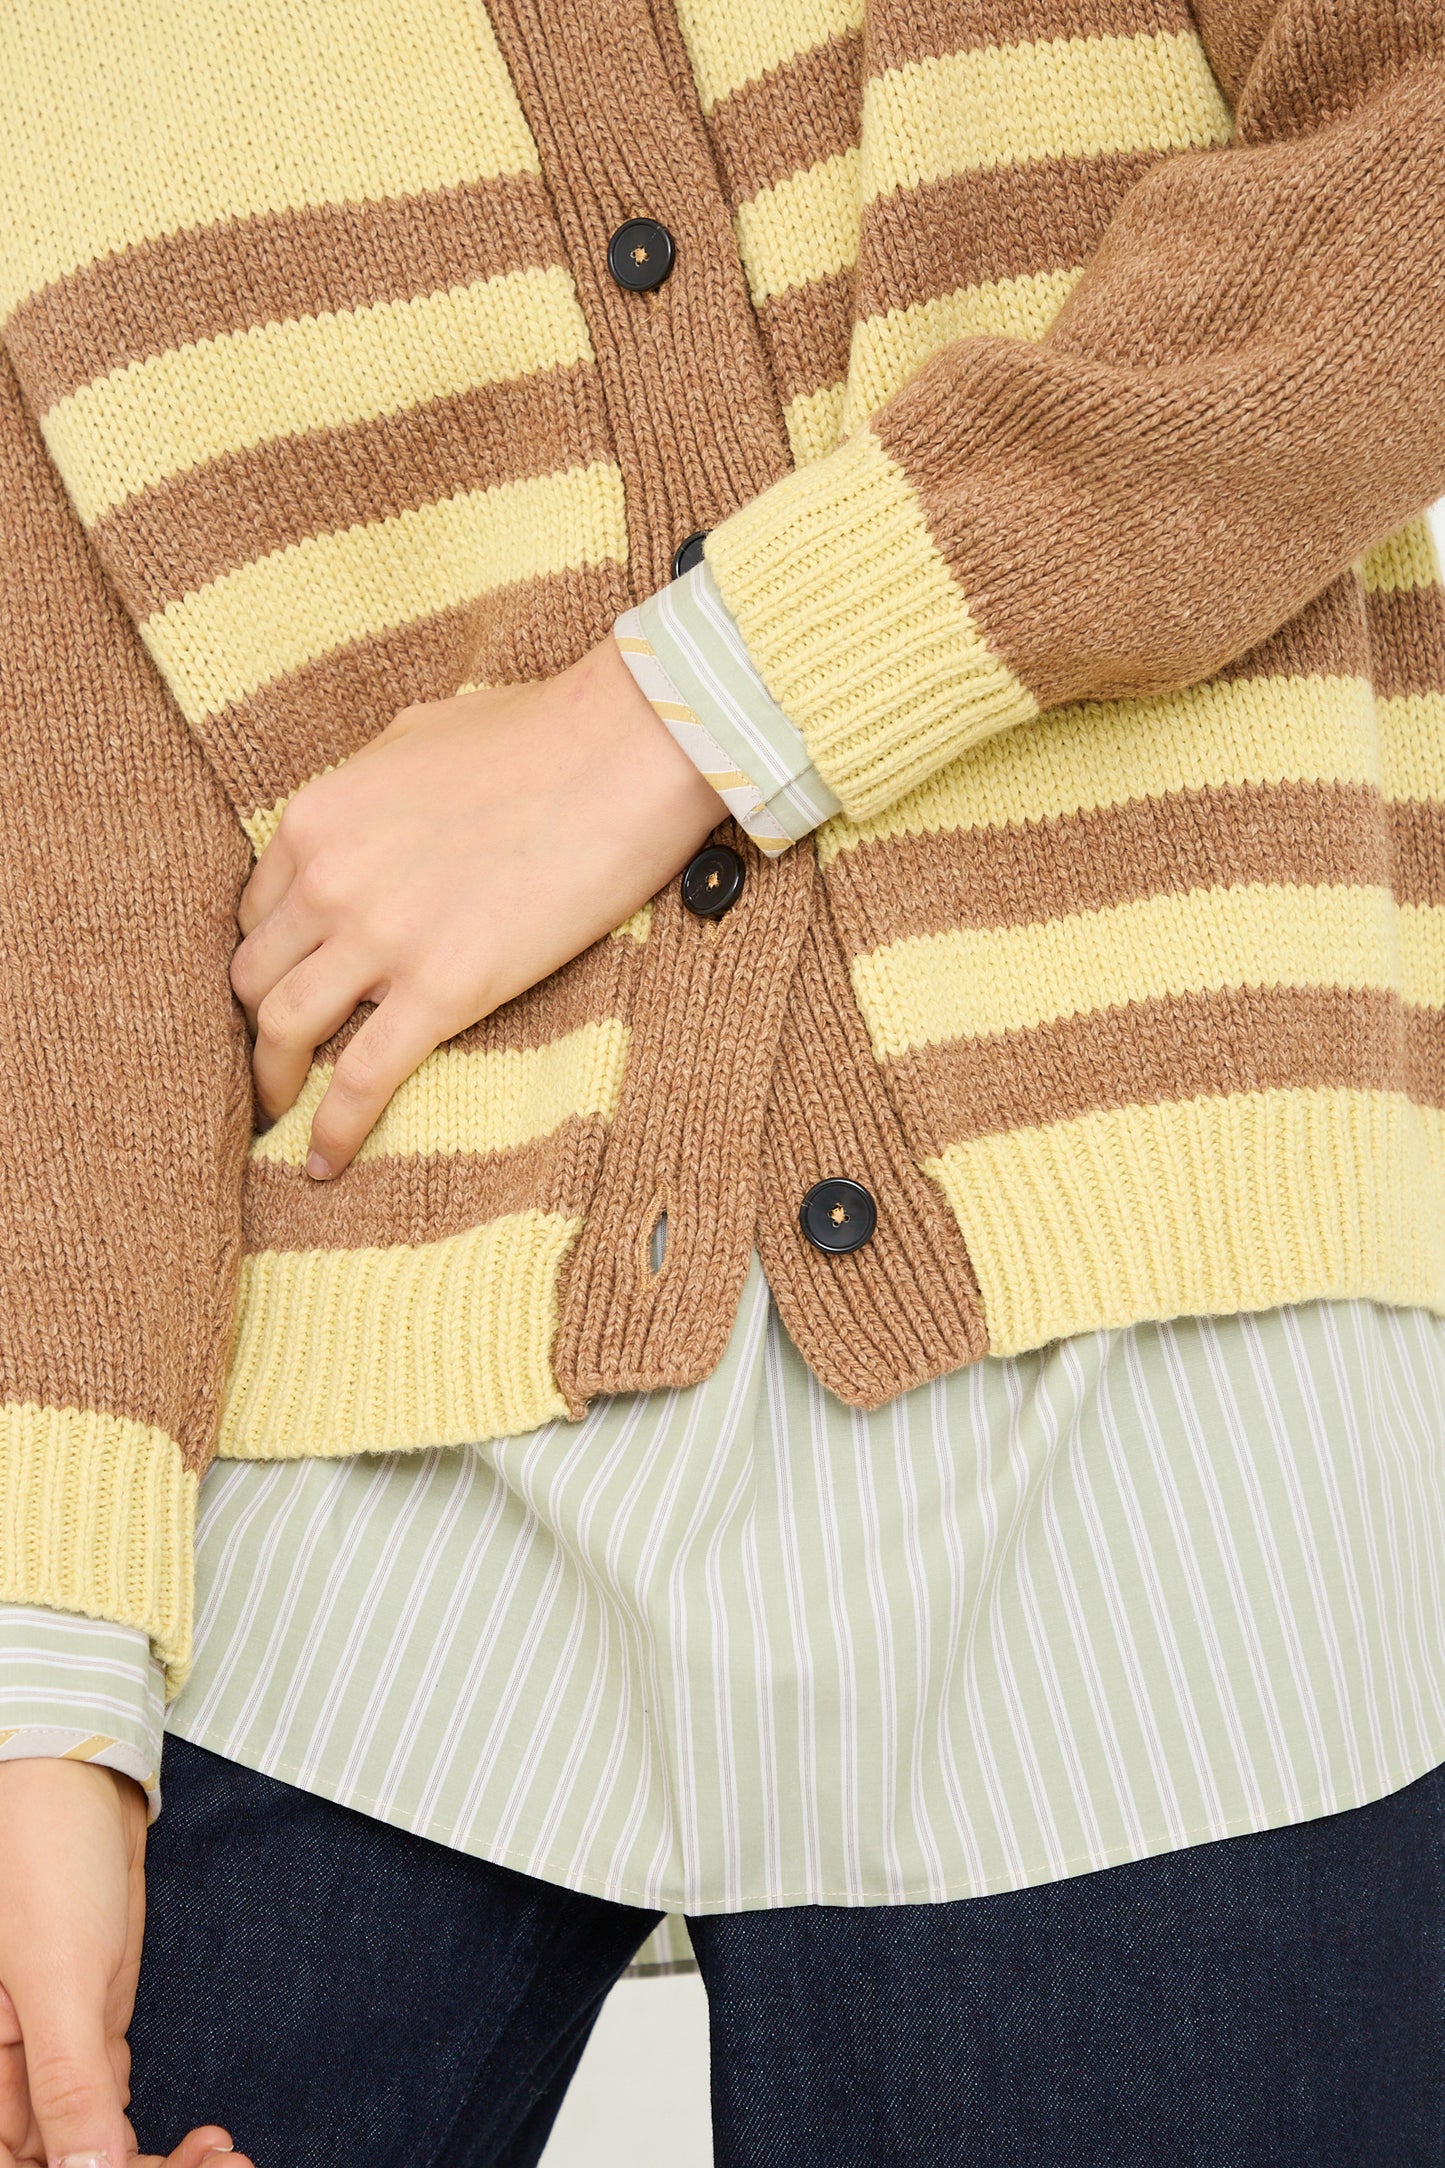 A close-up of a person wearing a Cawley Cotton and Lambswool Textured Stripe Cardigan in Celery and Nutmeg over a light blue and white striped Cotton shirt with their hand partially tucked into the front pocket of their outfit.